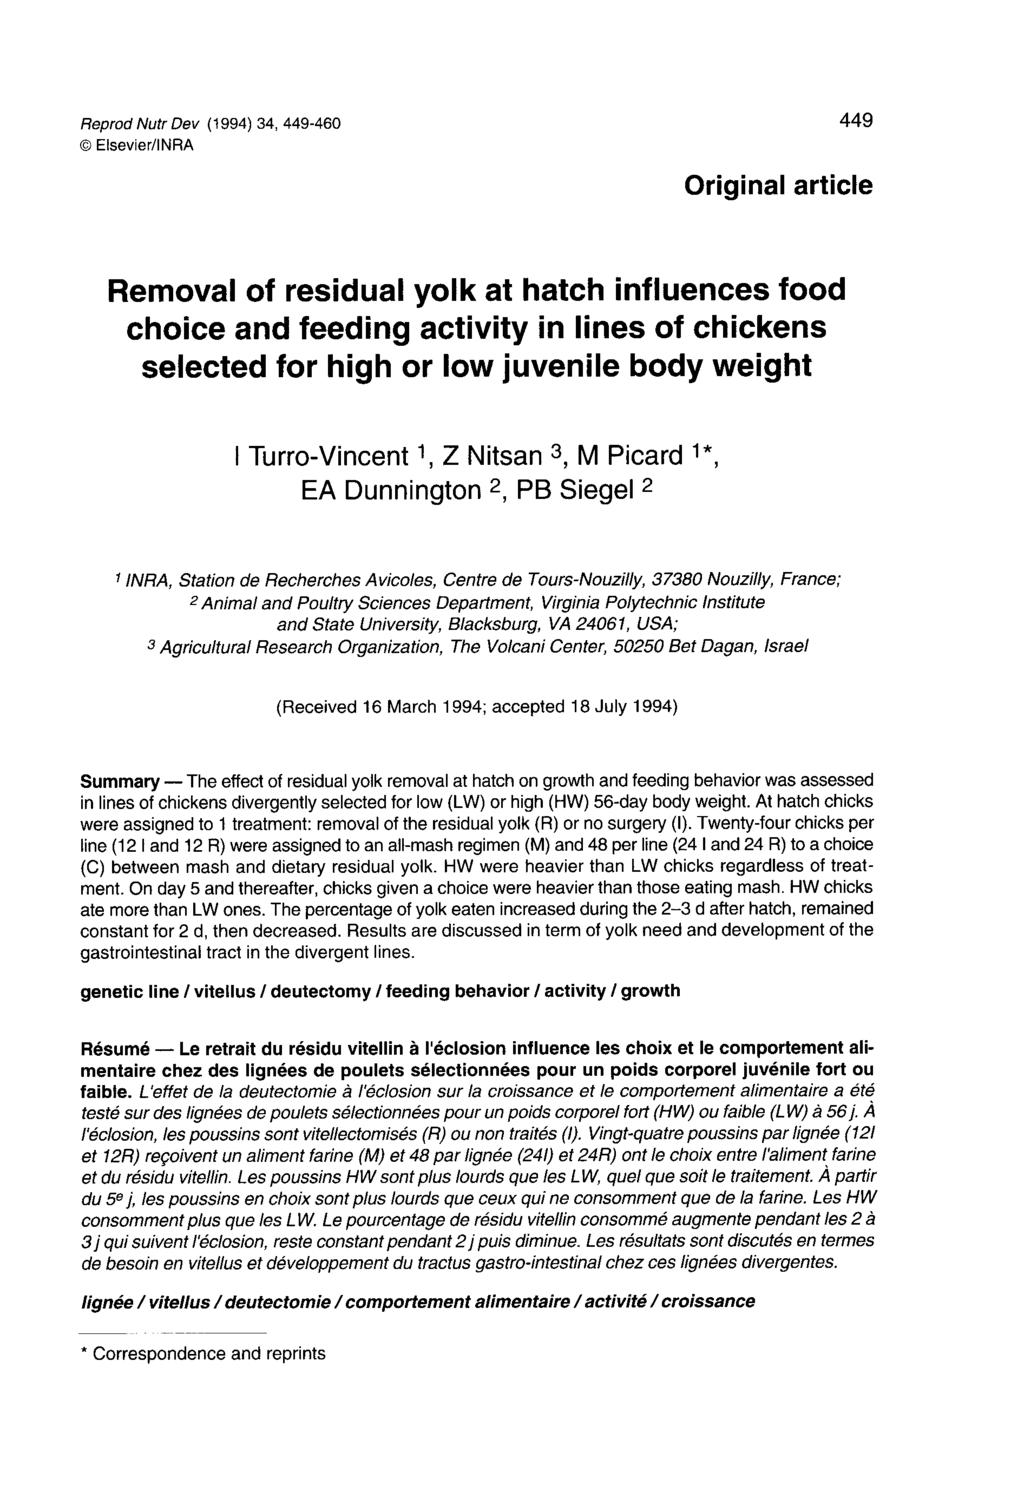 !!!! Original article Removal of residual yolk at hatch influences food choice and feeding activity in lines of chickens selected for high or low juvenile body weight I Turro-Vincent Z Nitsan 3 M